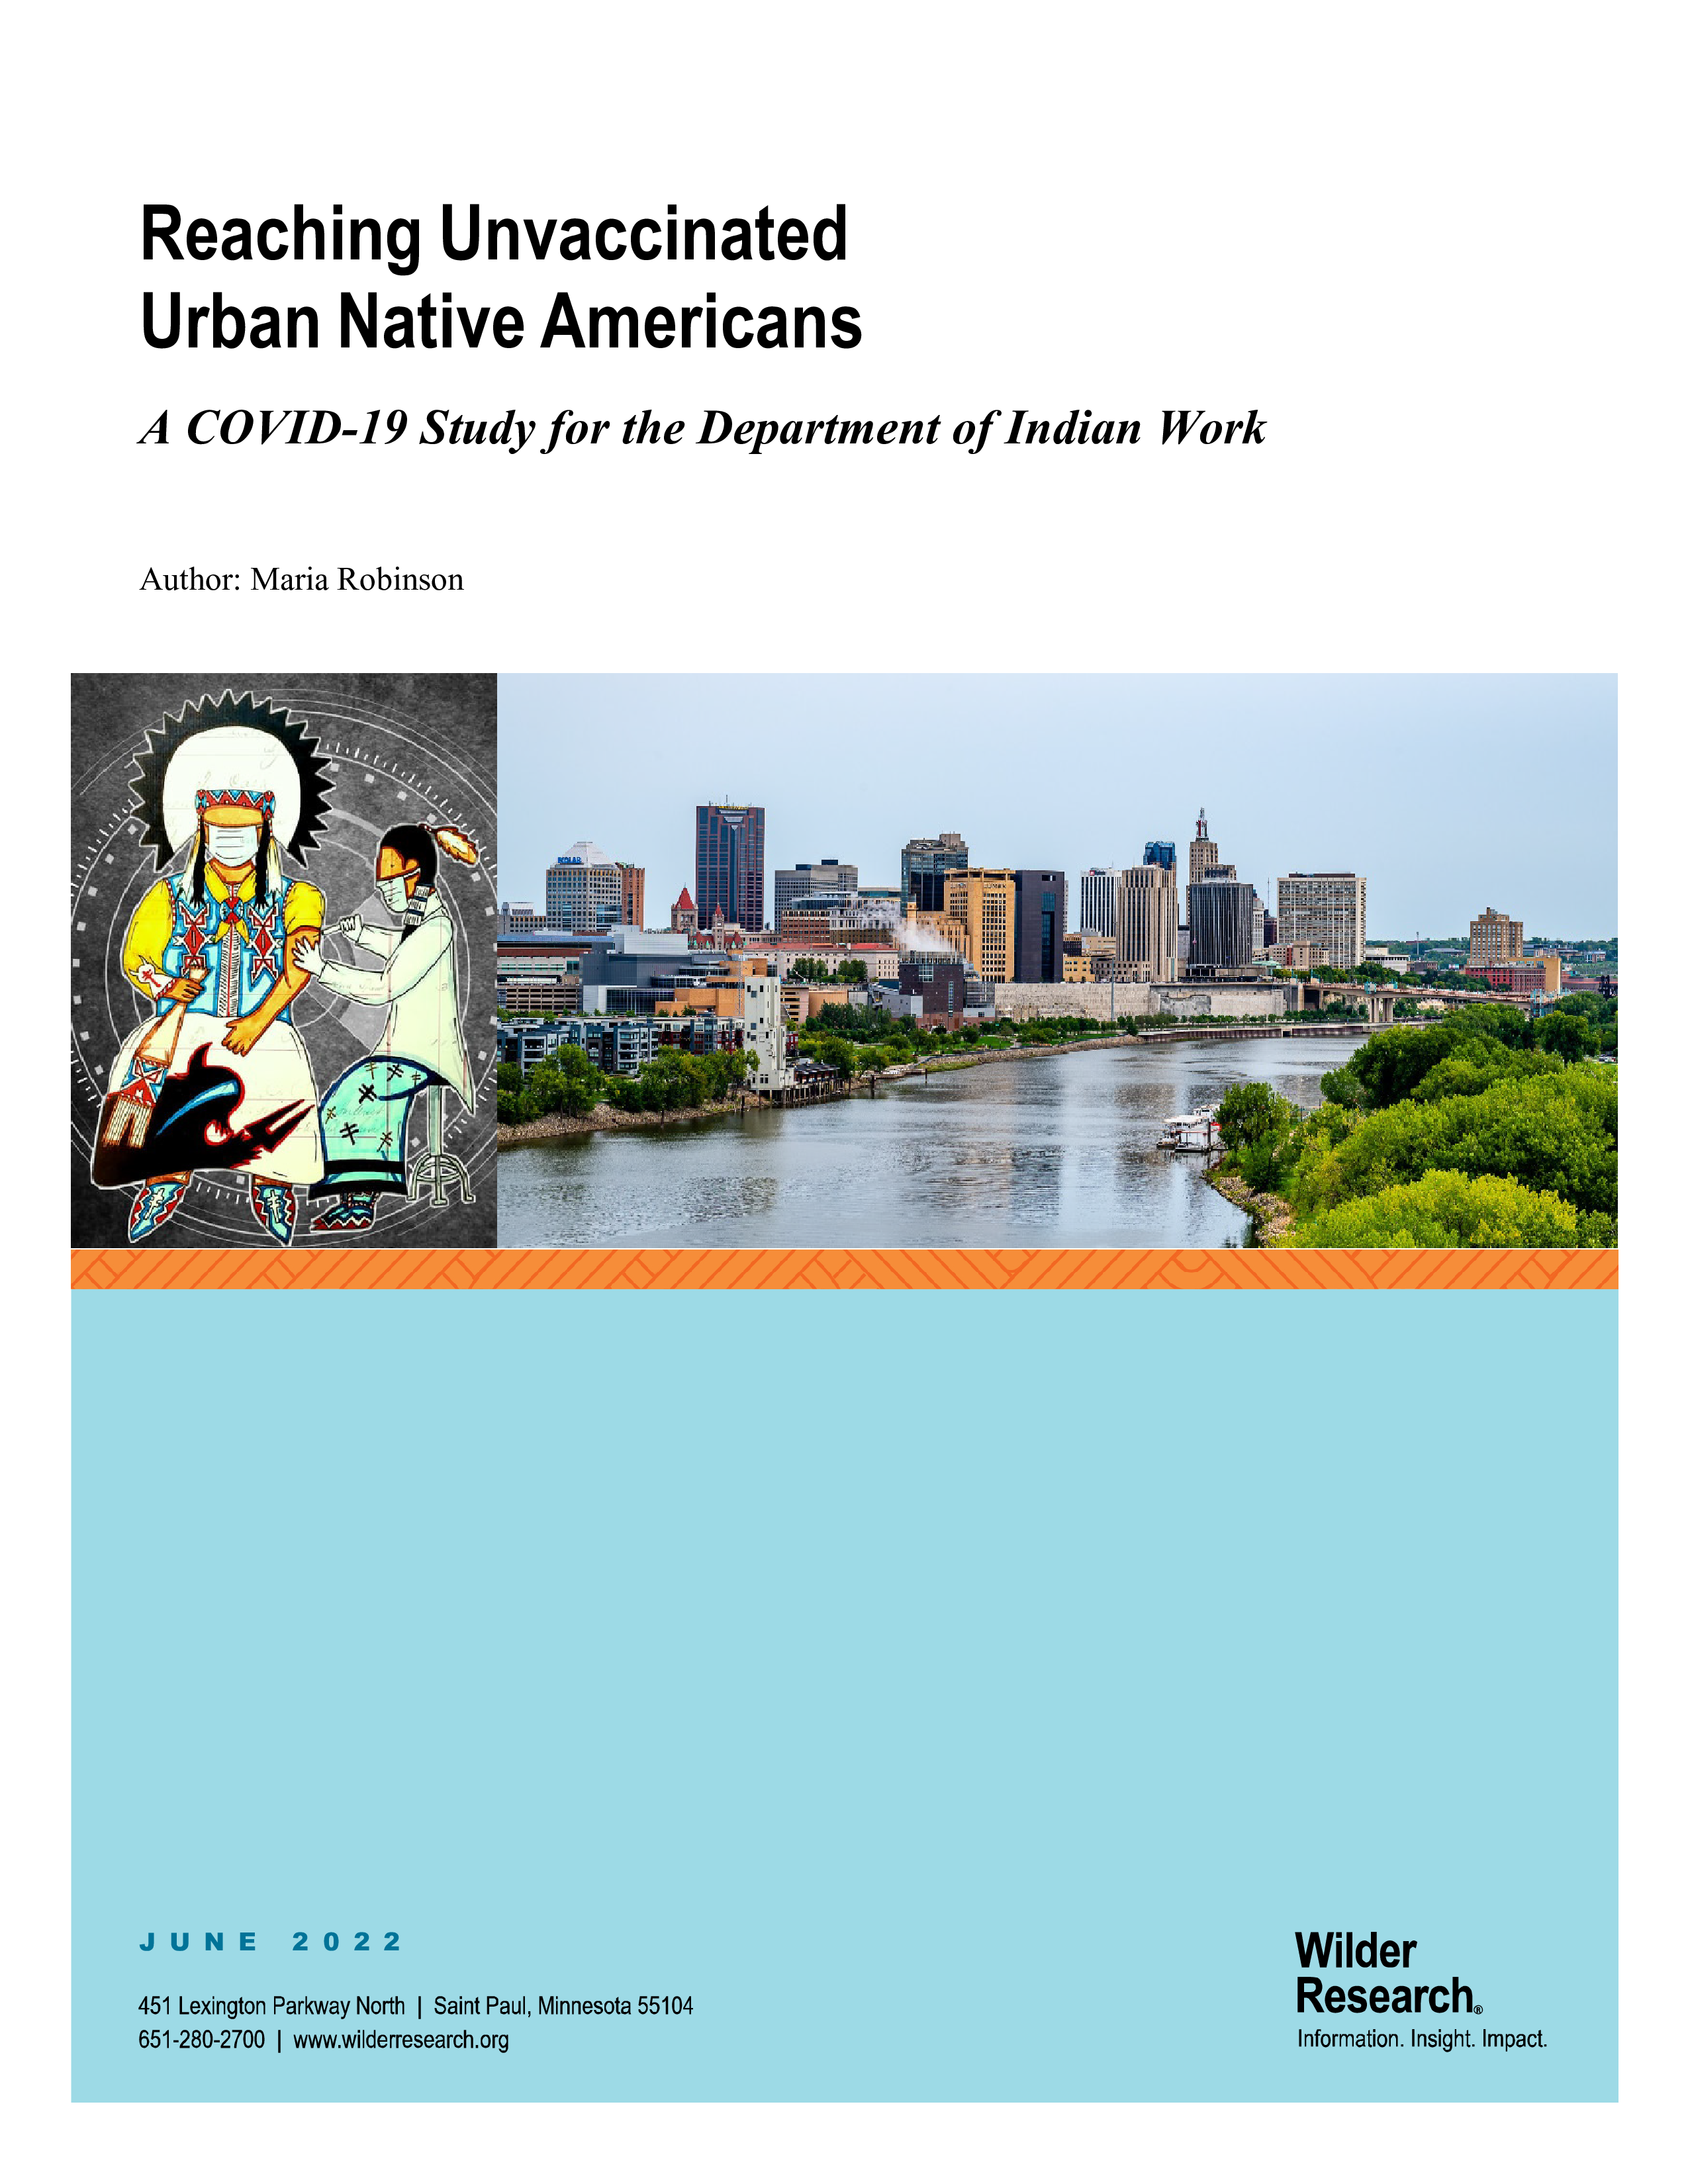 Cover page of report shows a work of Native American art to the right of a picture of the city of St. Paul Minnesota.